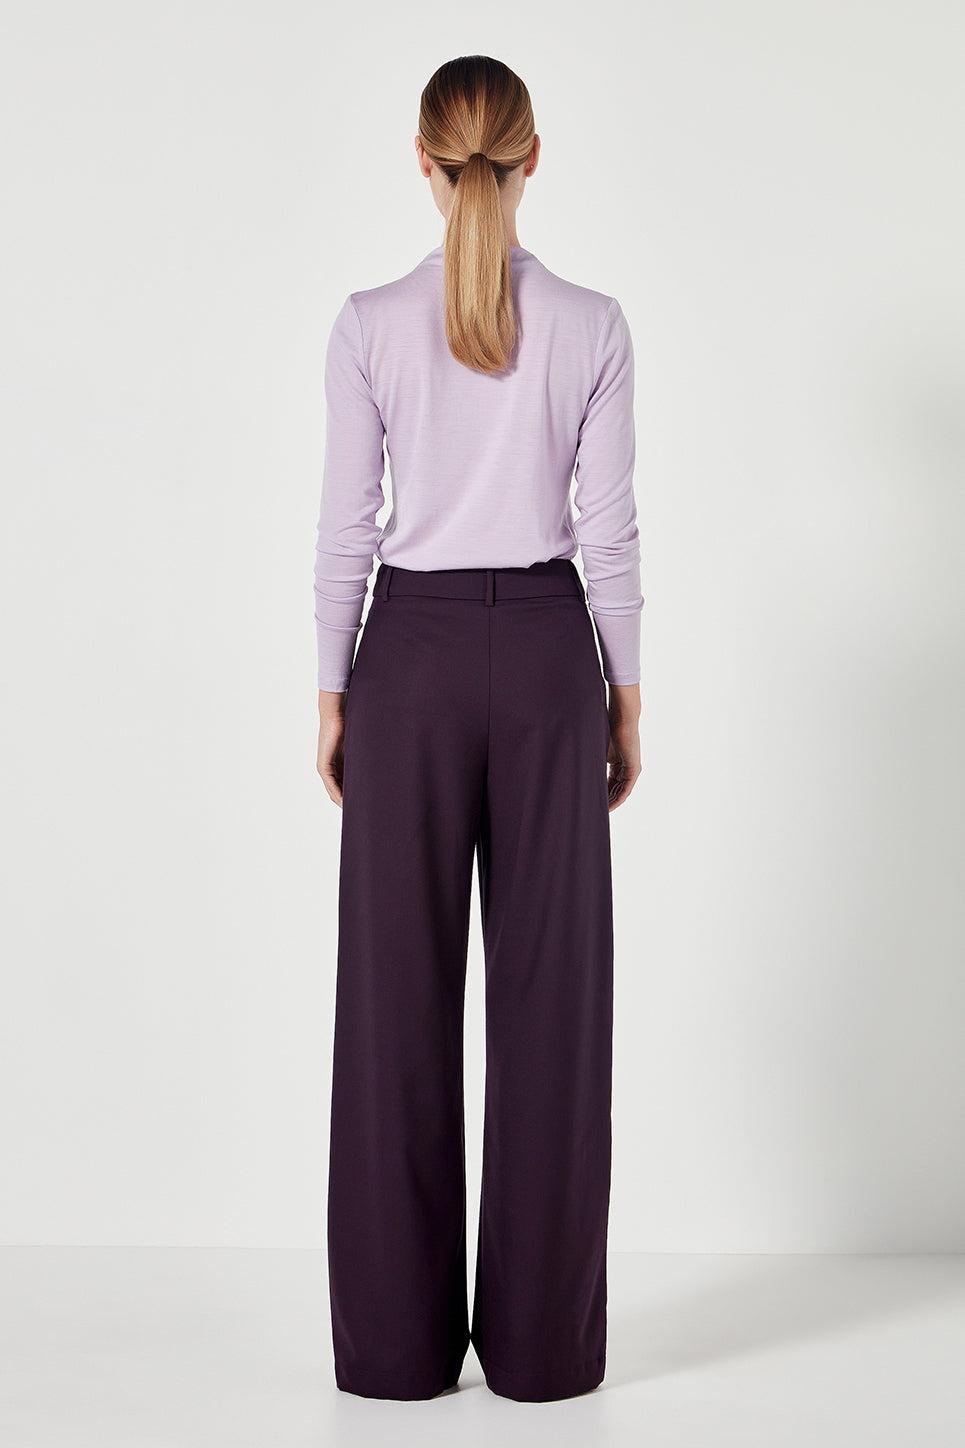 The Cezanne Top in Lilac